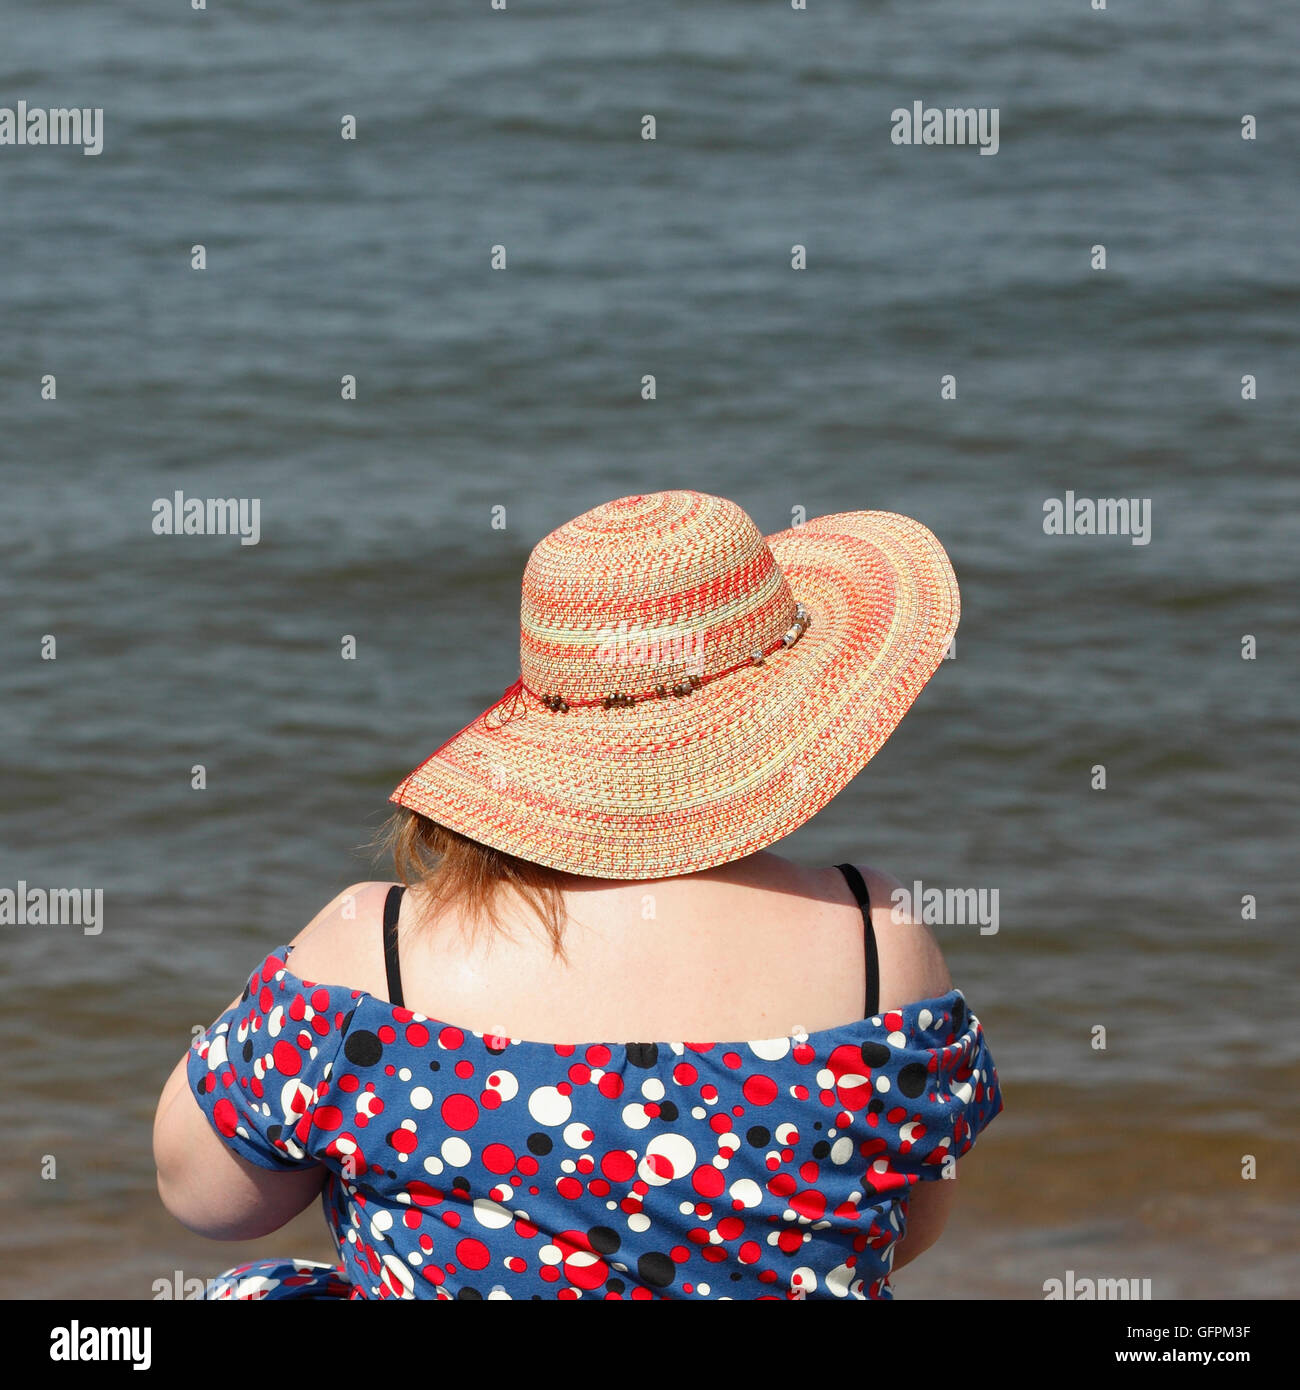 Woman wearing straw sun hat at the beach on a hot Summer's day. Stock Photo